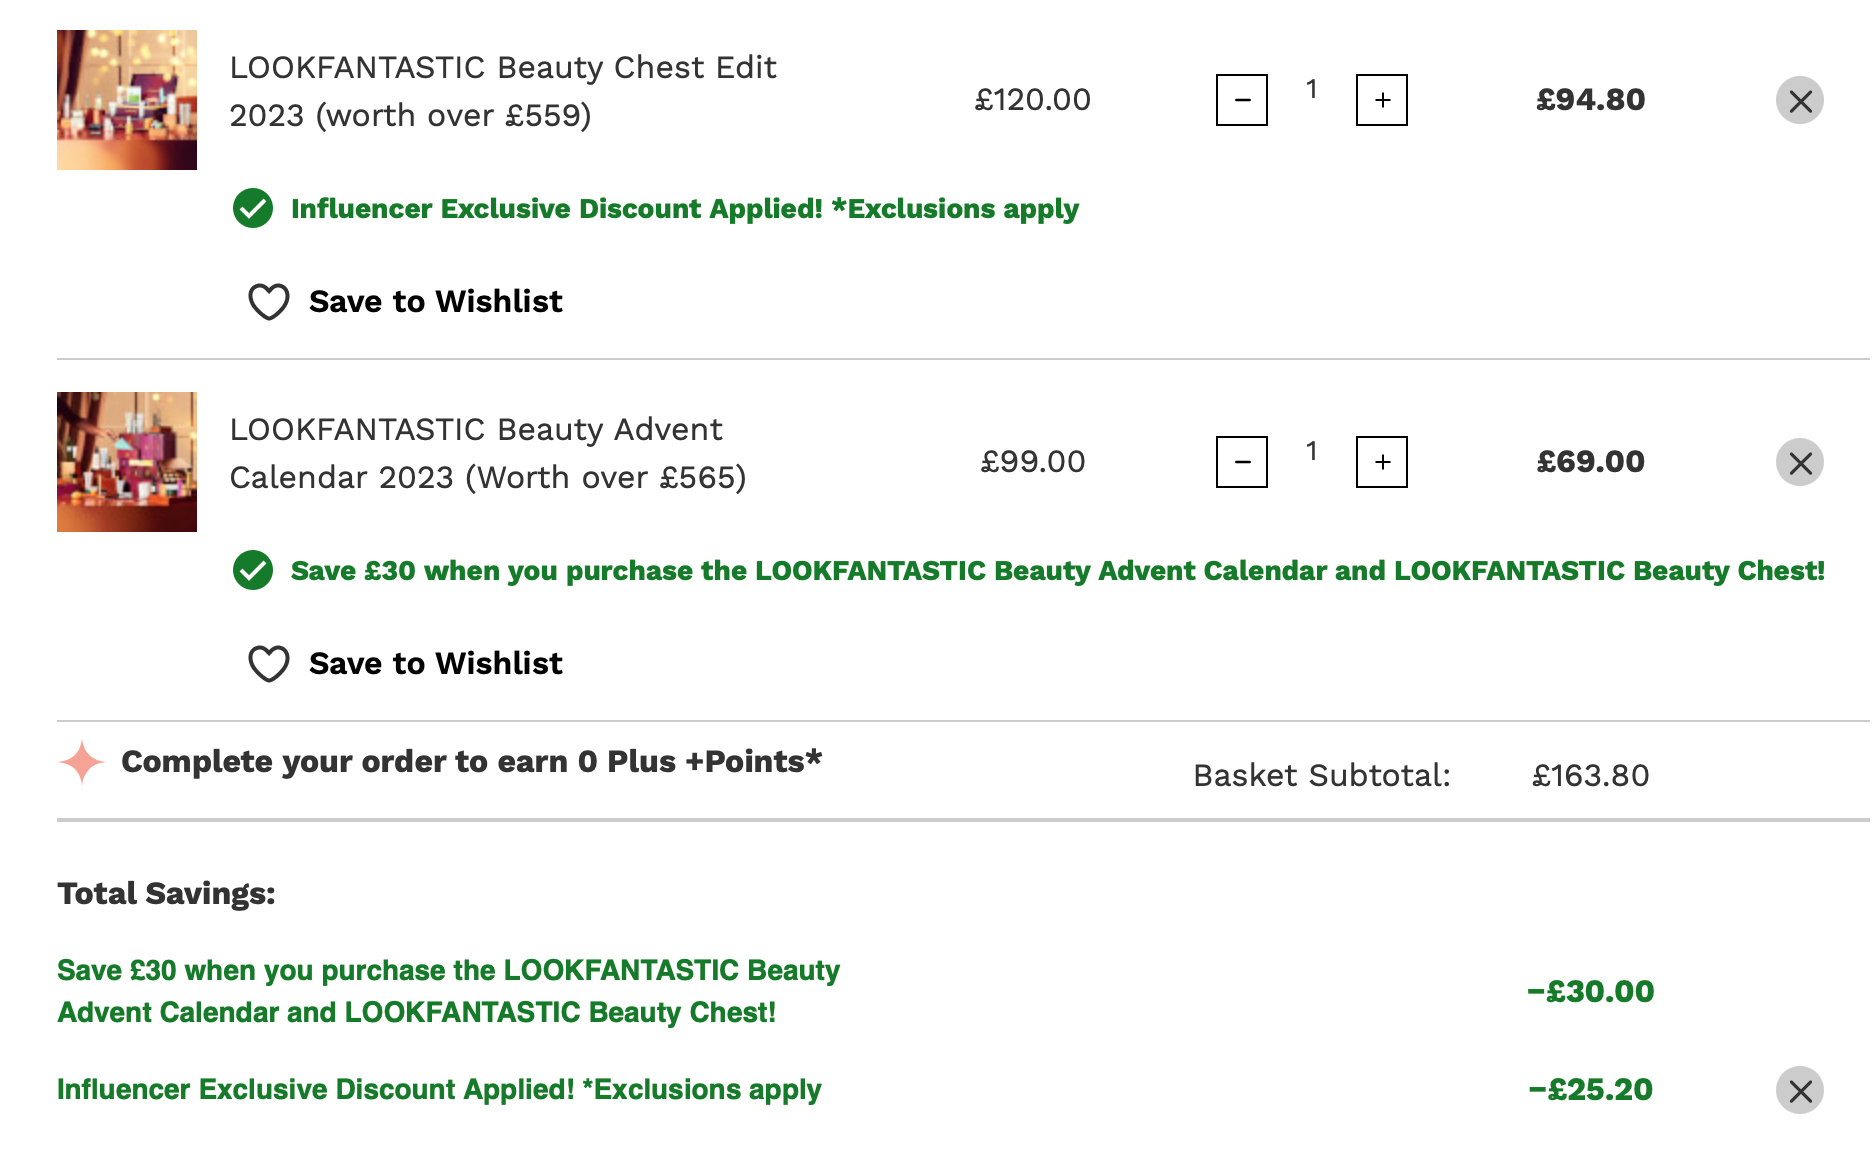 £30 off when you purchase the Lookfantastic Beauty Advent Calendar 2023 and Lookfantastic Beauty Chest Edit 2023